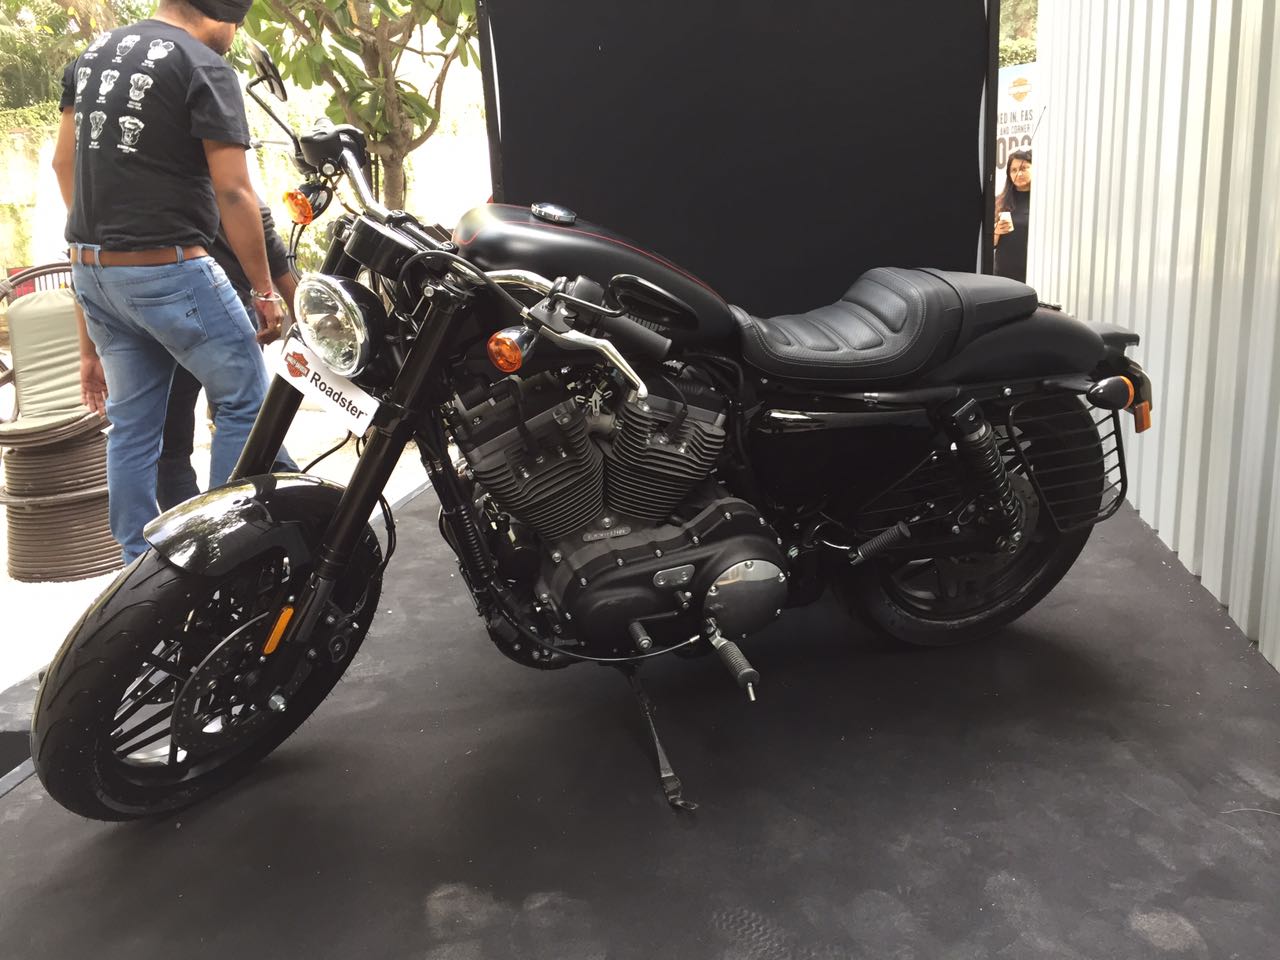 My2017 Harley Davidson Range Launched In India